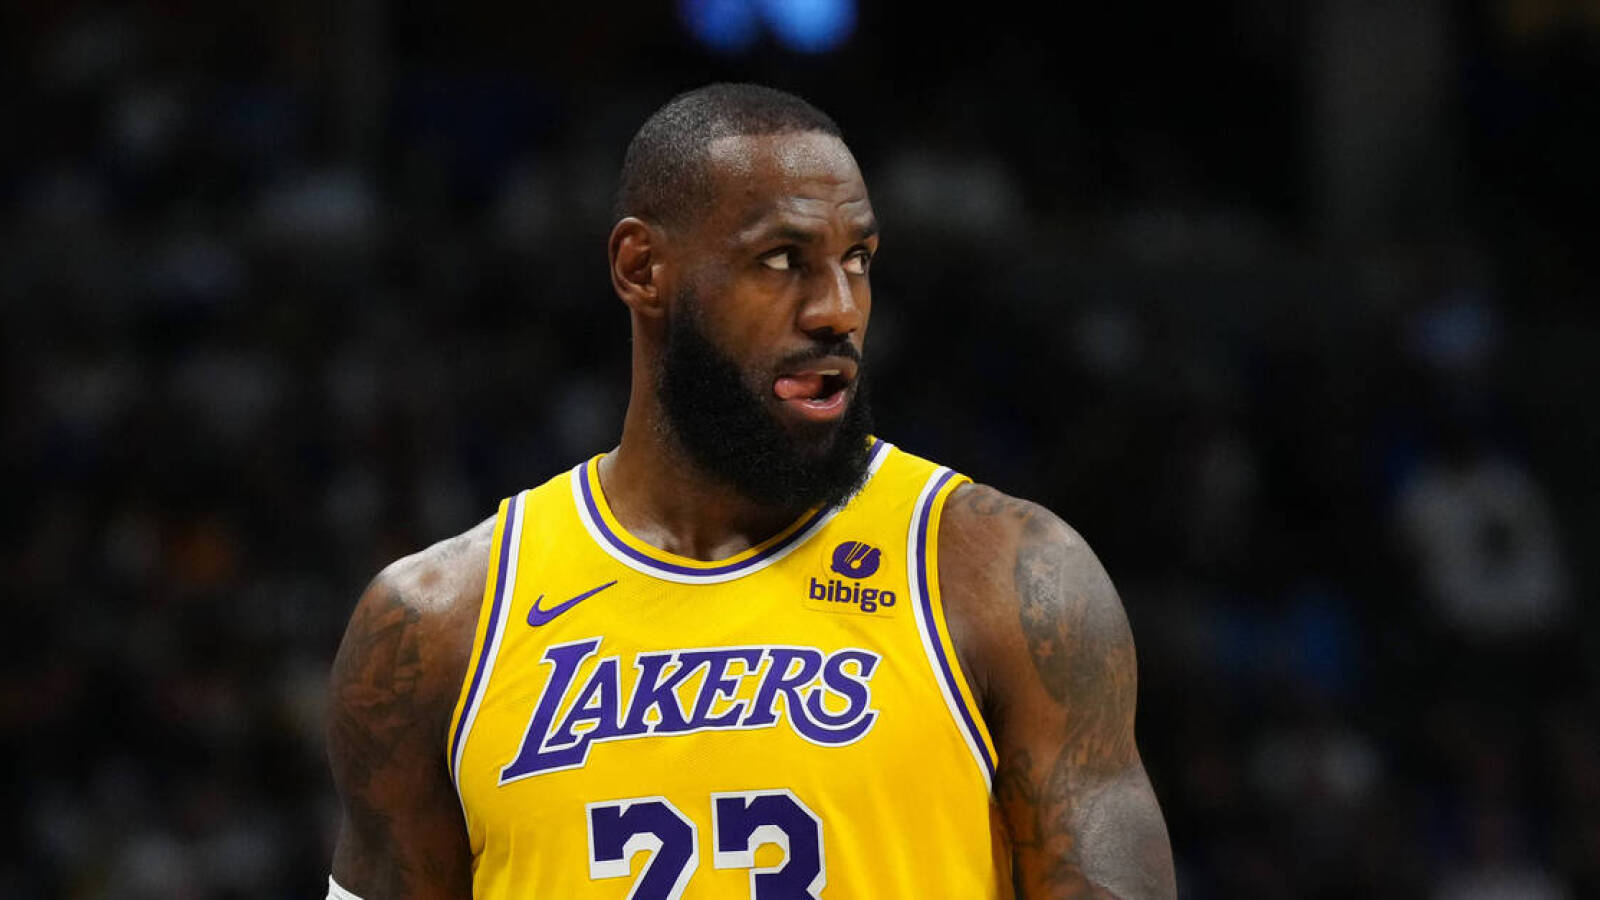 Video shows LeBron James furious with ref in Game 2 loss